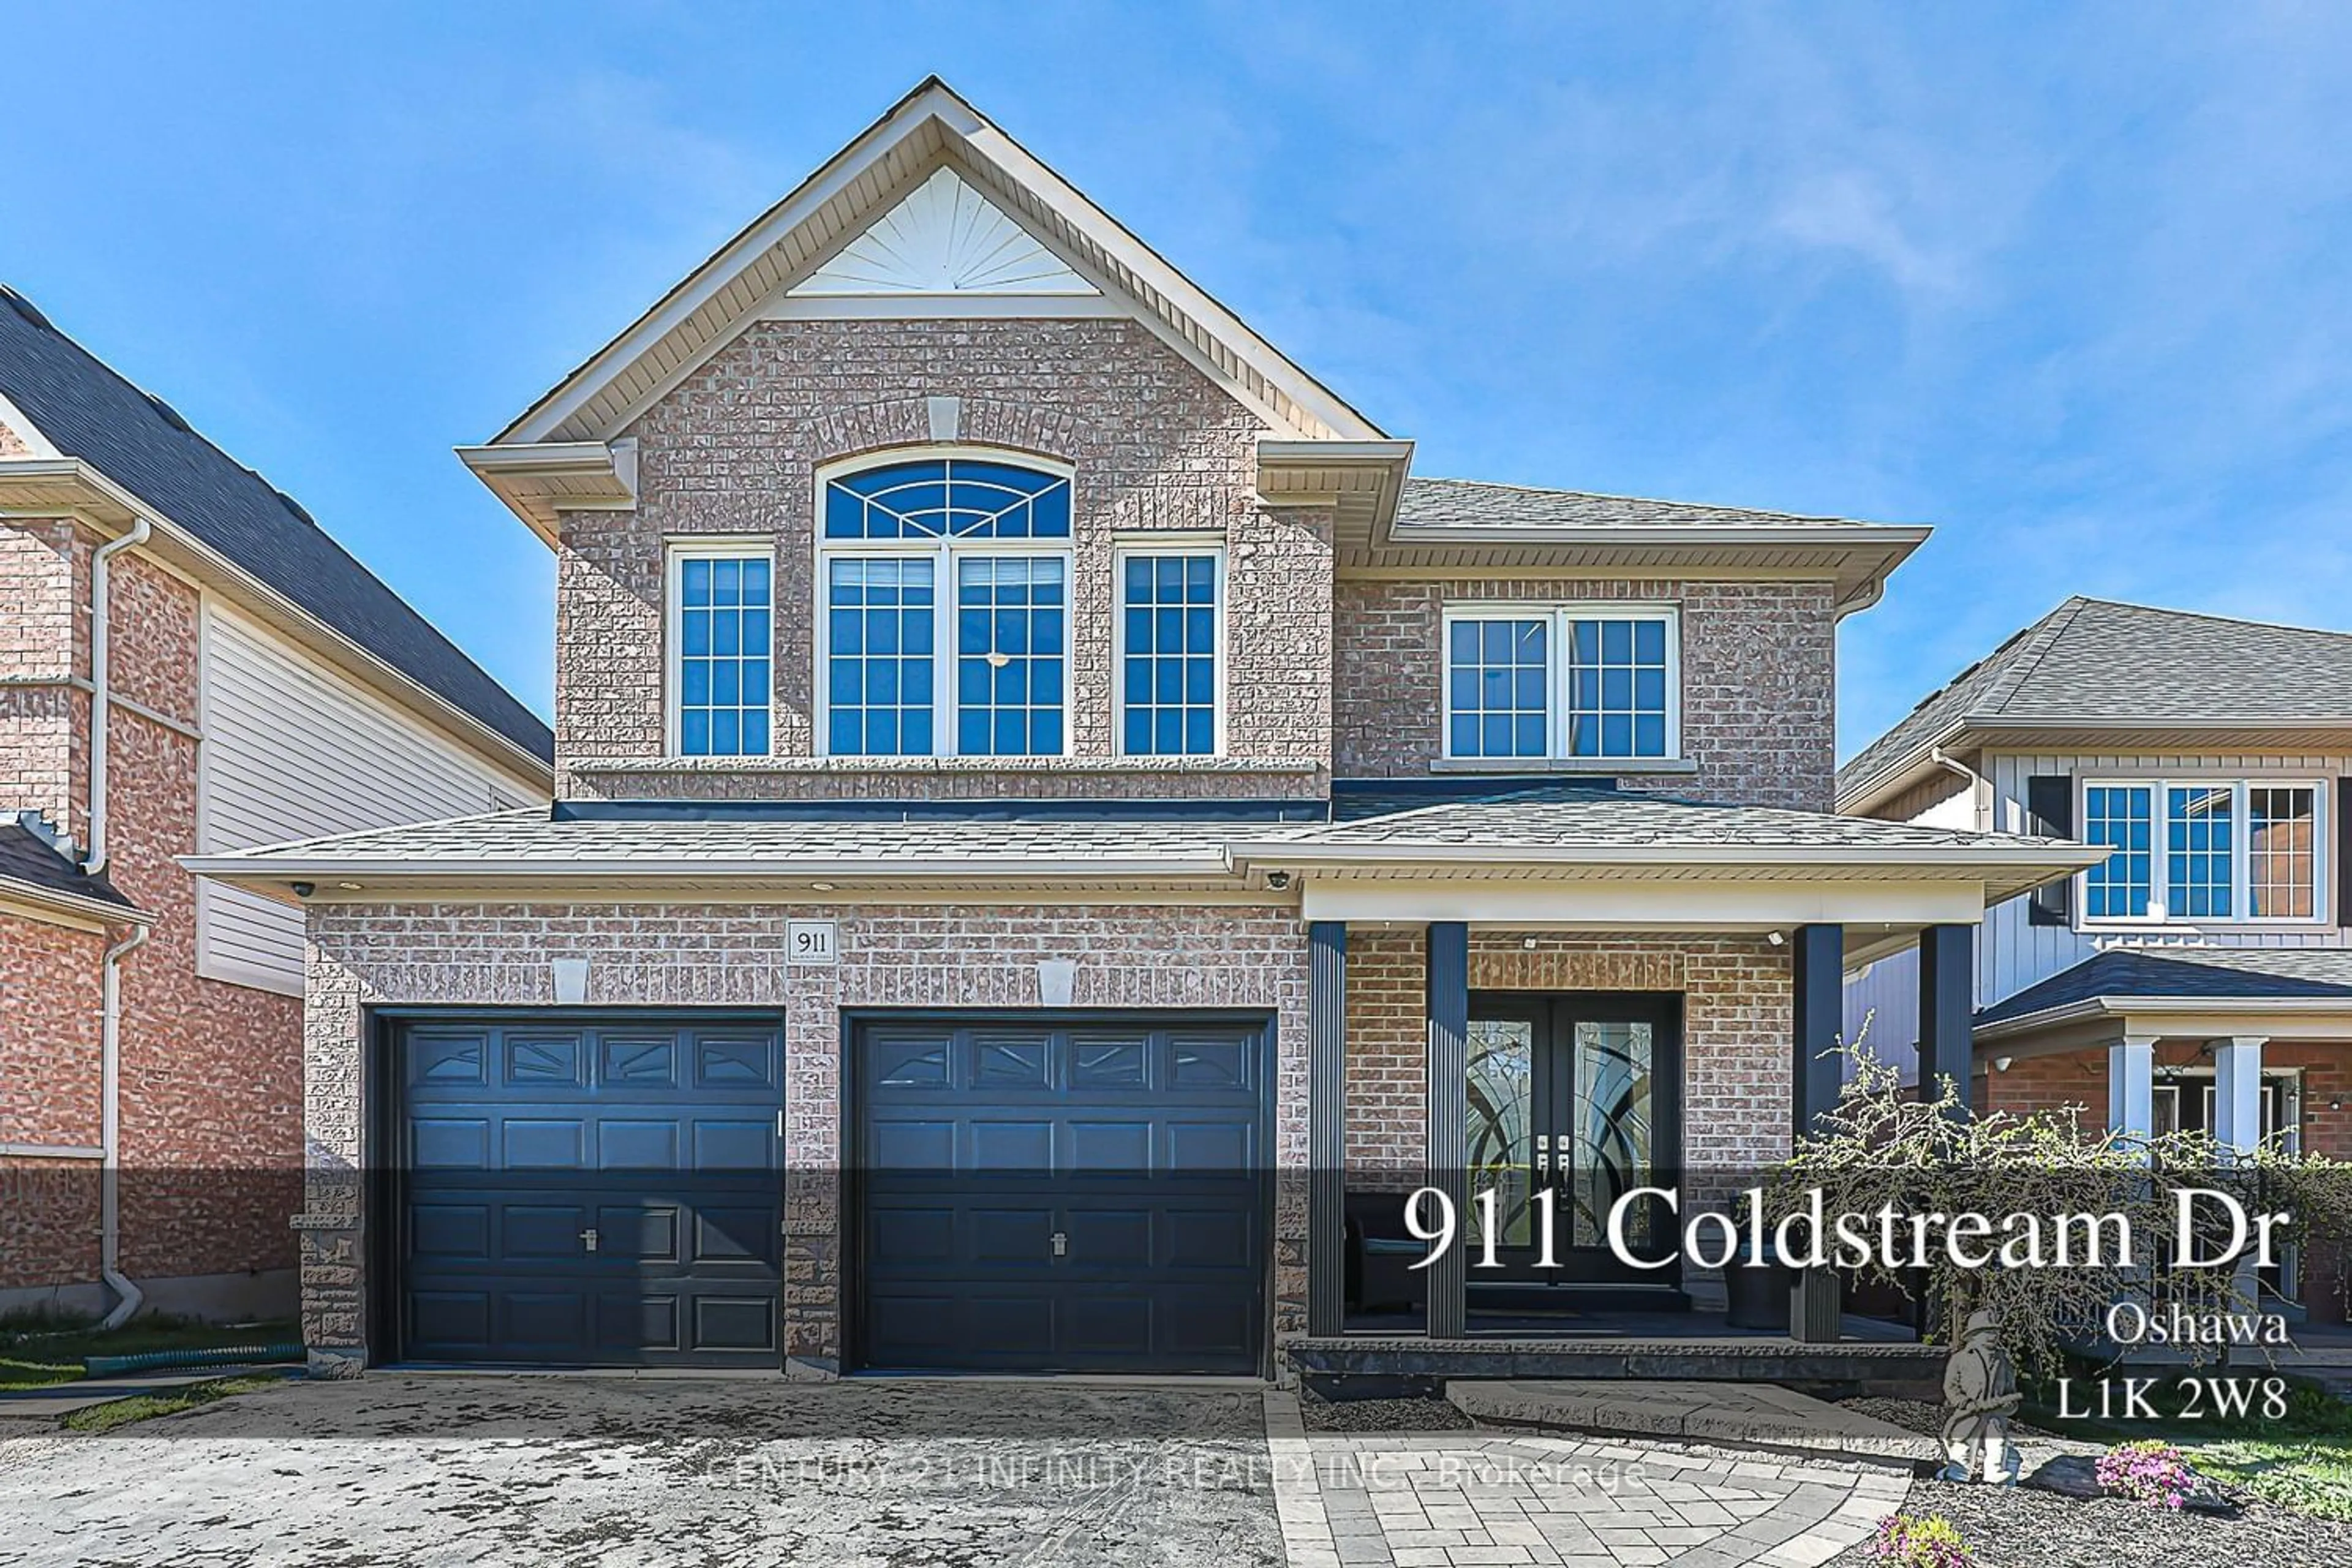 Home with brick exterior material for 911 Coldstream Dr, Oshawa Ontario L1K 2W8